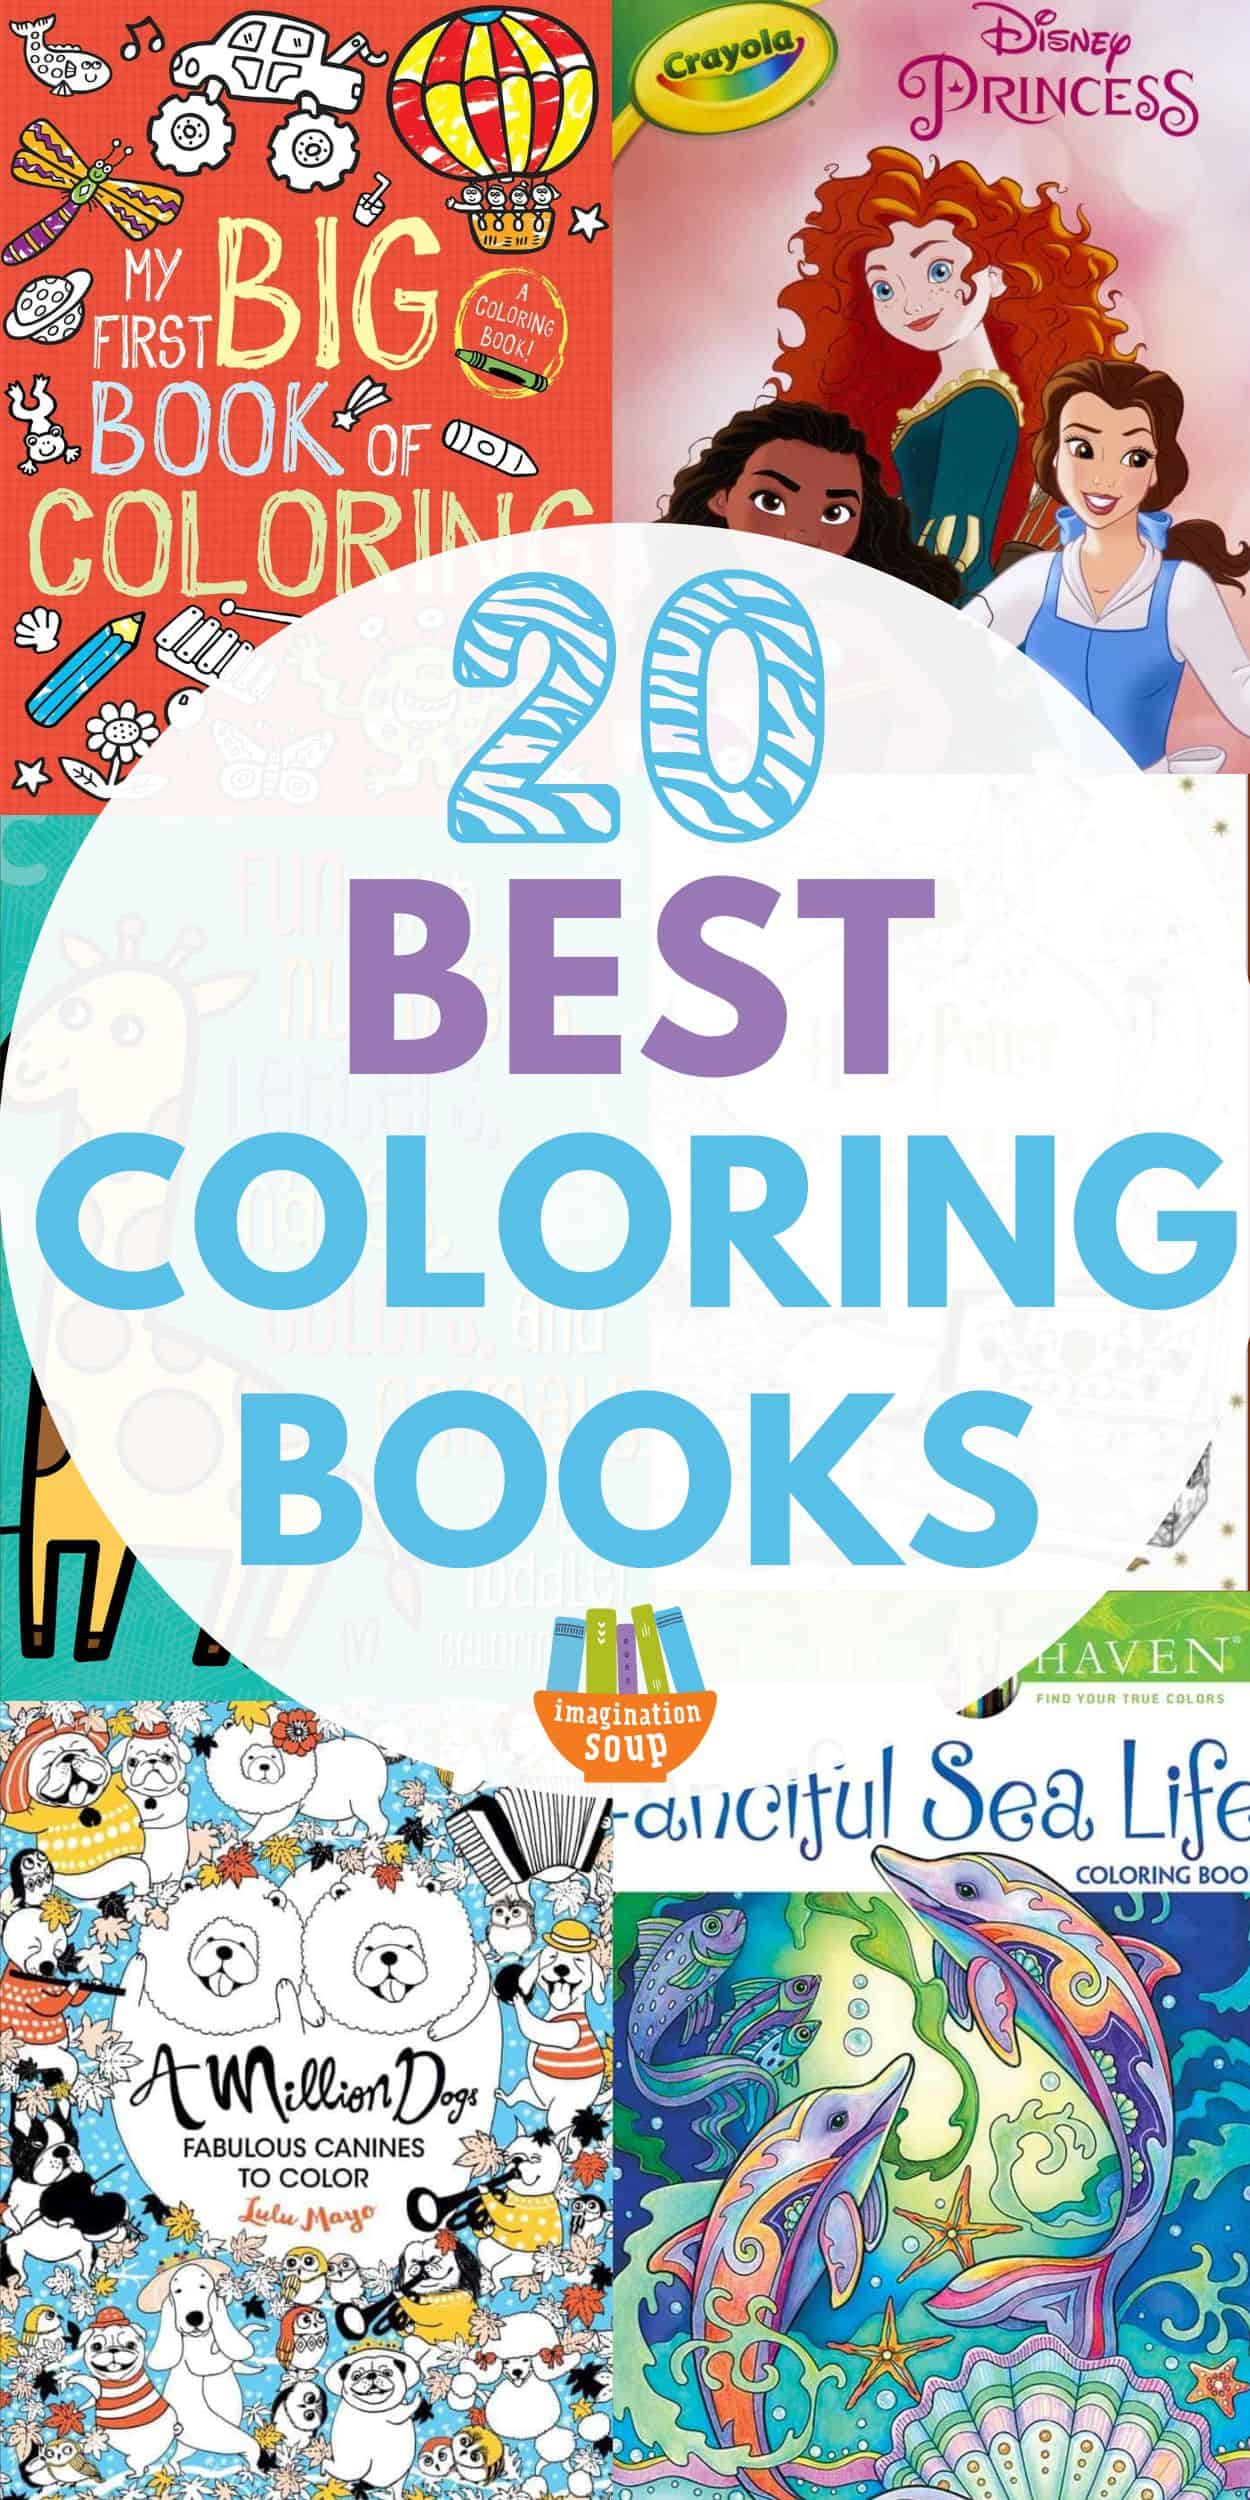 Too much screen time? Kids complaining they're bored? Try some new coloring books as a way to spend your at-home hours in a creative way.

I don't know about you but sometimes my kids just need a new, shiny, never been seen coloring book to get them refocused on art and off their screens.

Plus, coloring books improve concentration, develop motor skills, and calm your mind. Big benefits for children in addition to getting off screens.